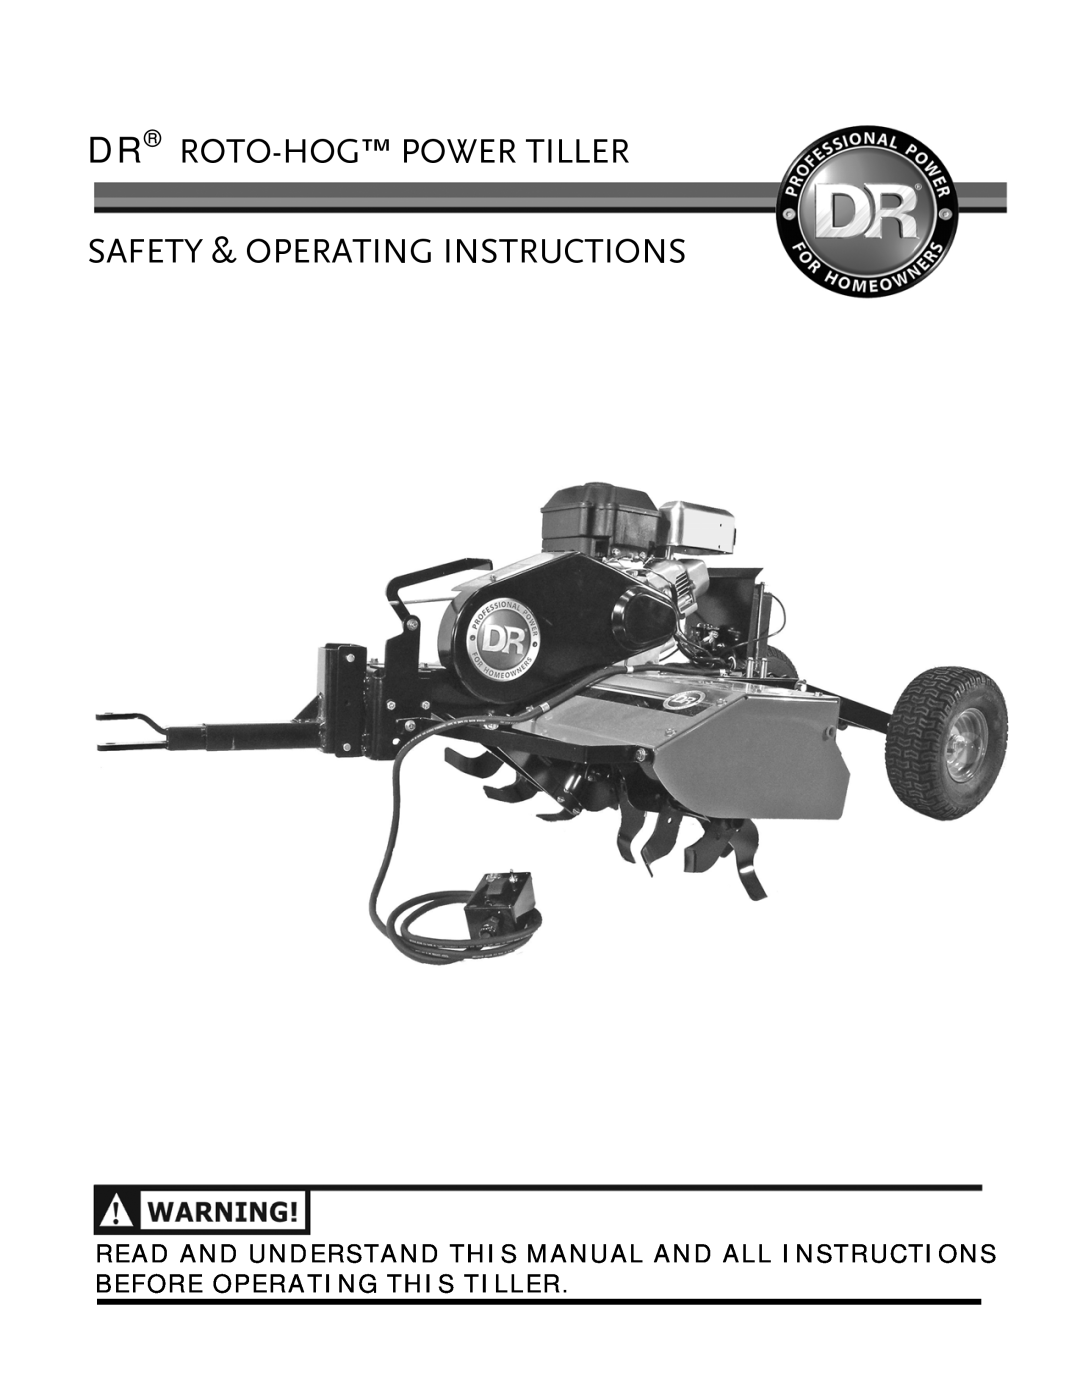 Country Home Products ROTO-HOGTM manual Dr Roto-Hogpower Tiller, Safety & Operating Instructions 